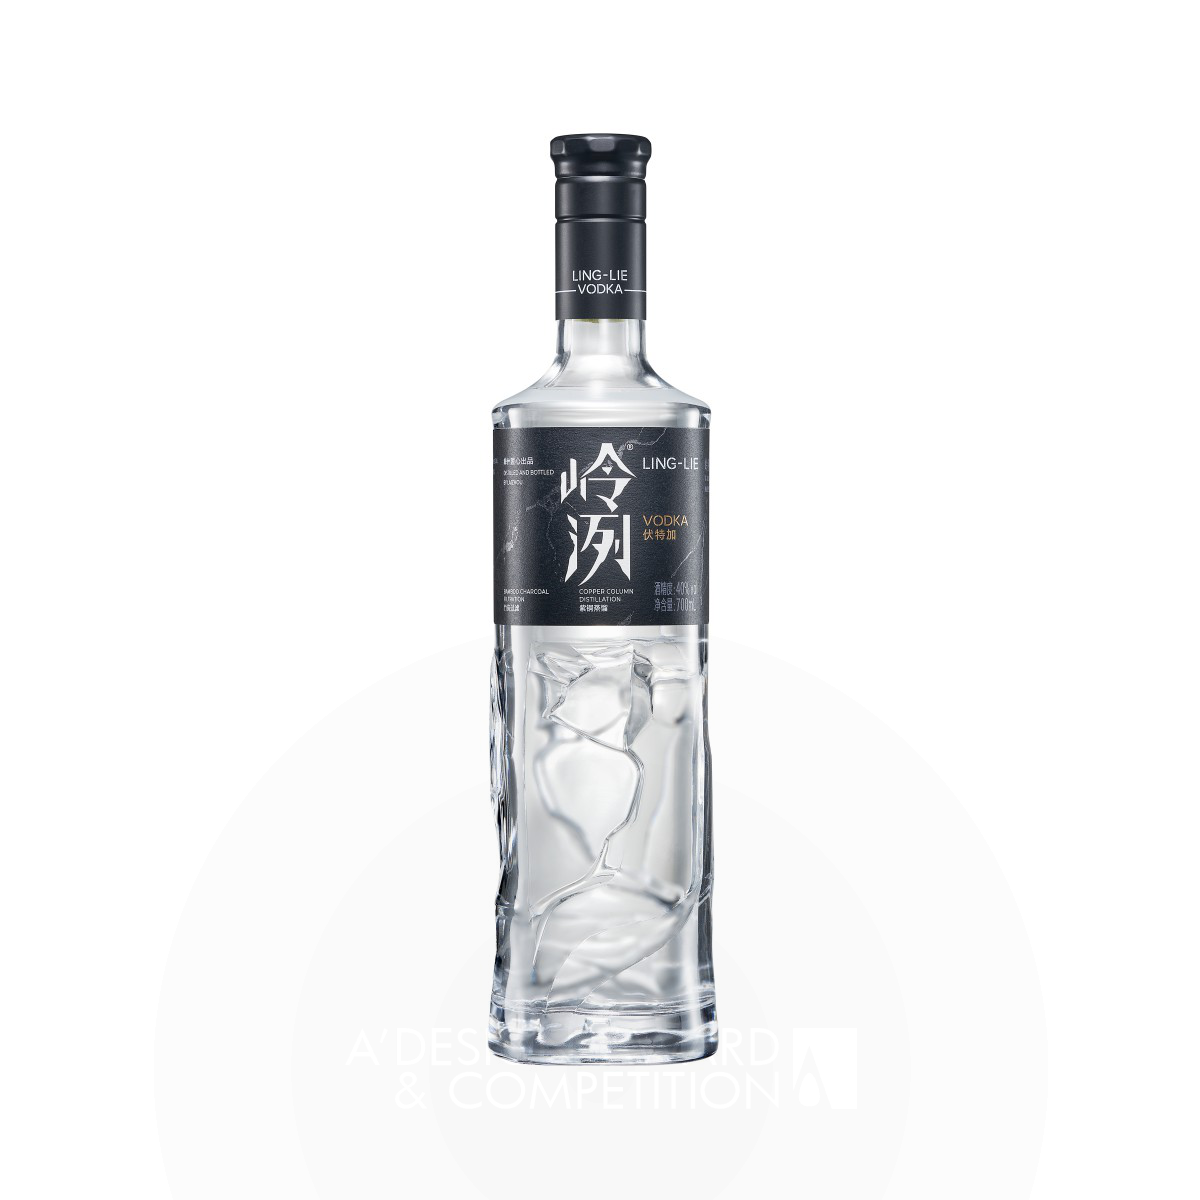 Laizhou Distillery wins Silver at the prestigious A' Packaging Design Award with Ling Lie Vodka Packaging.